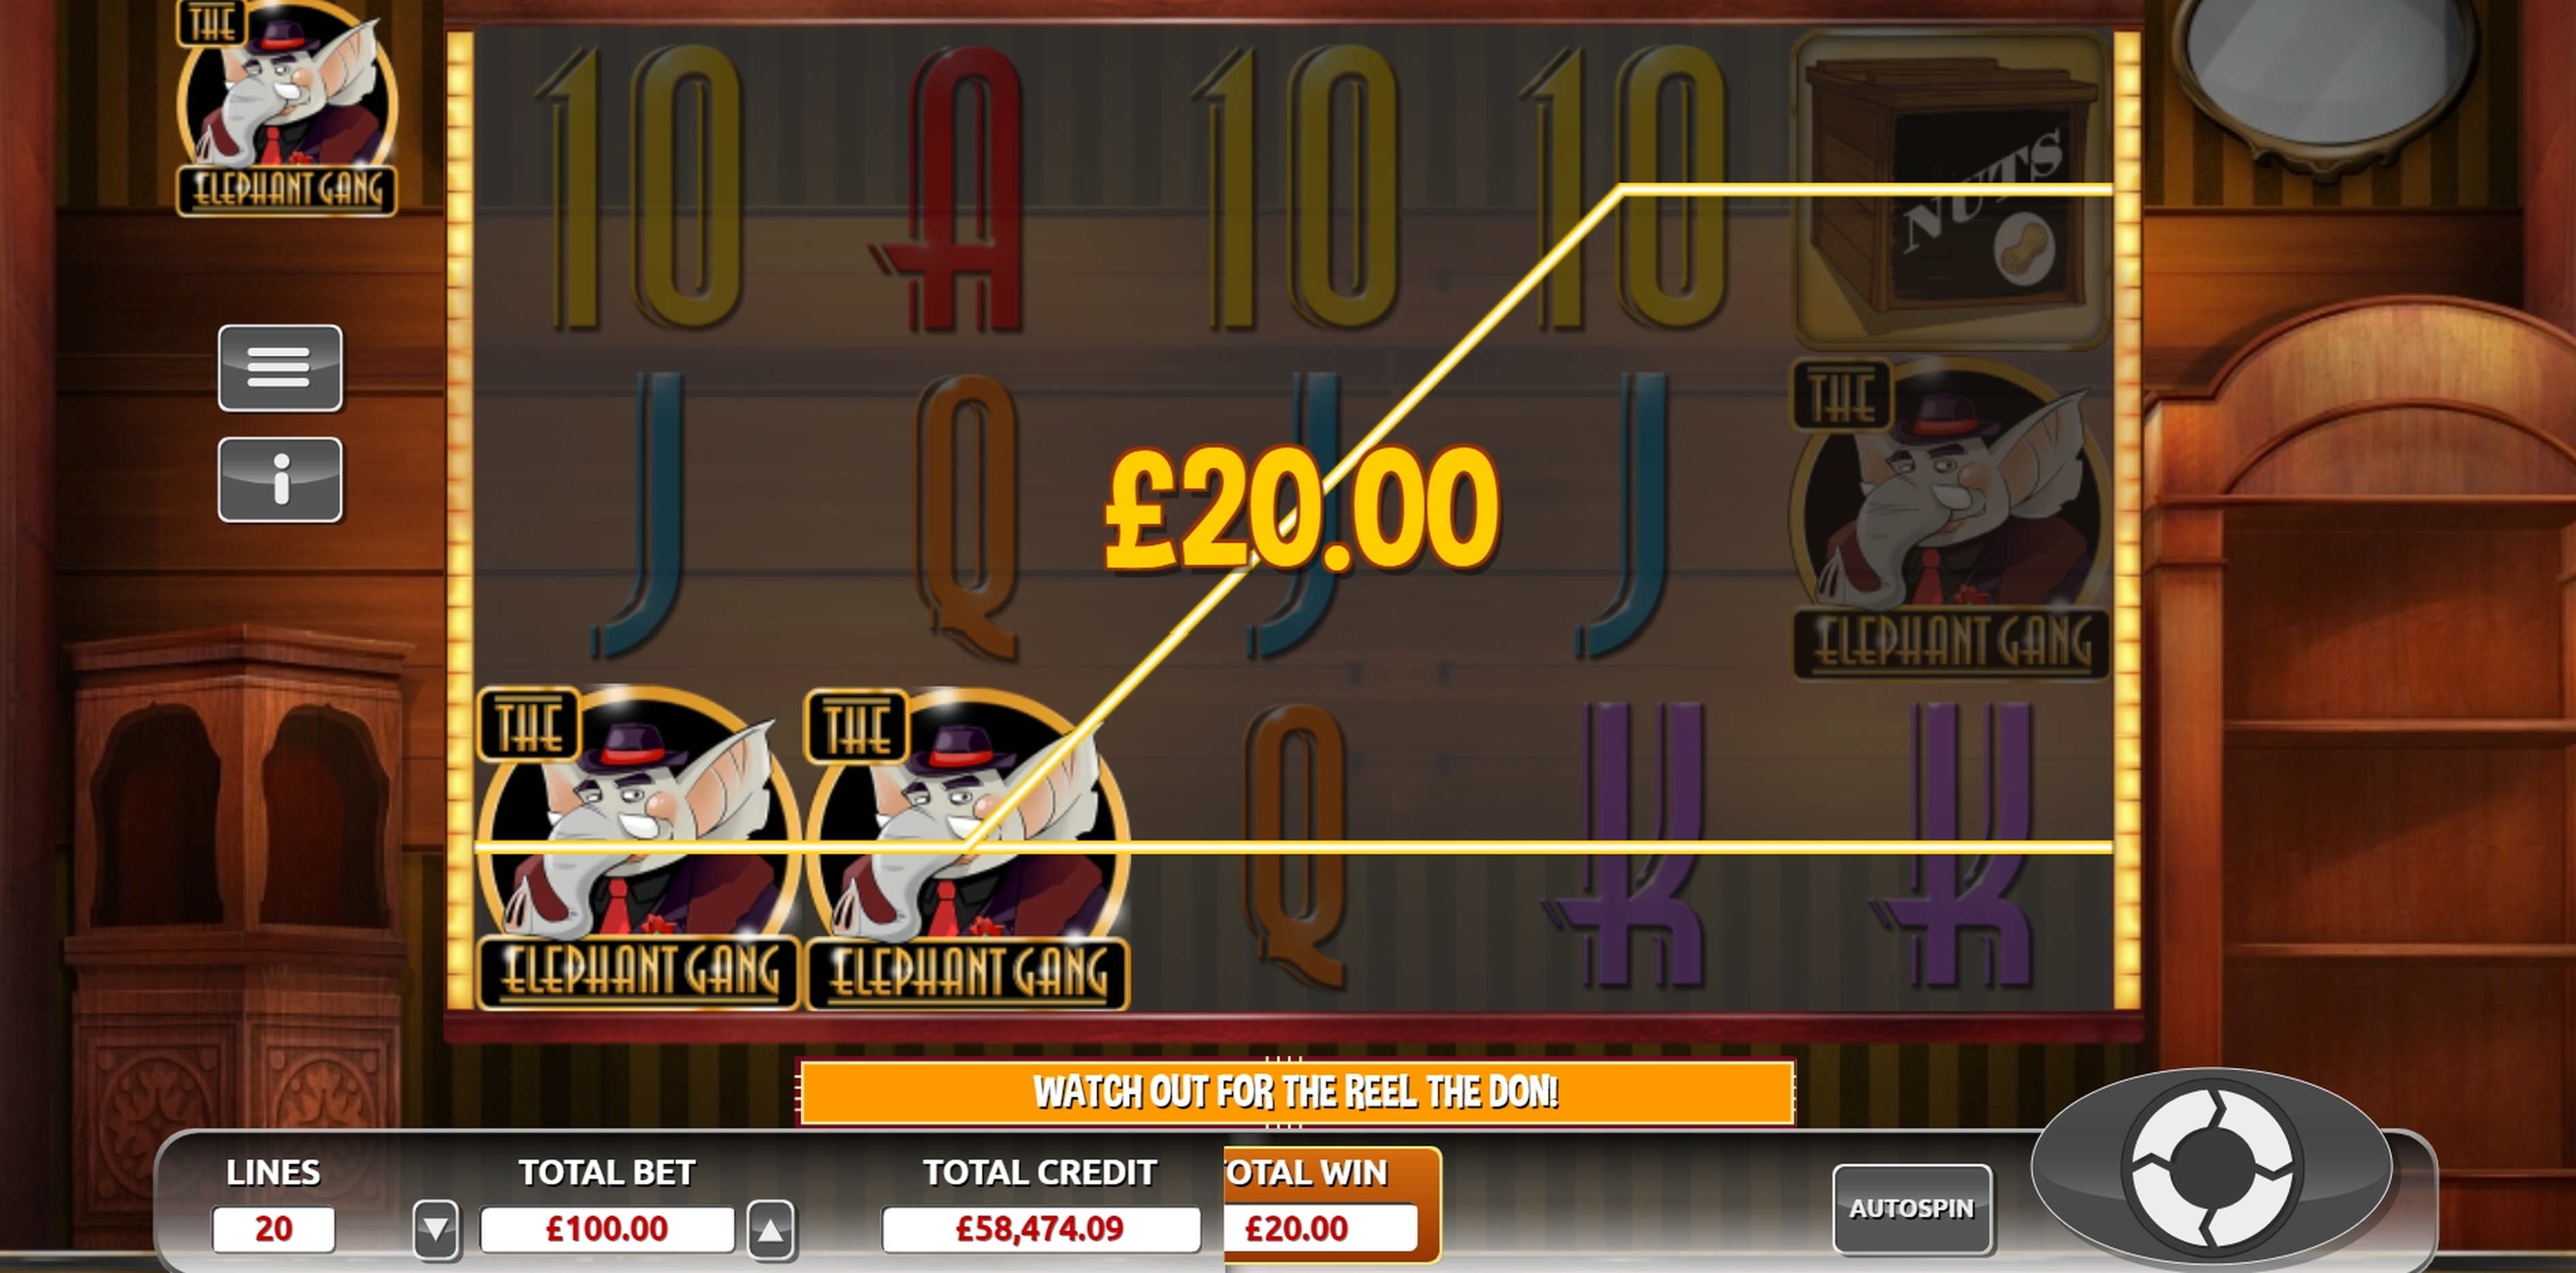 Win Money in The Elephant Gang Free Slot Game by Skyrocket Entertainment